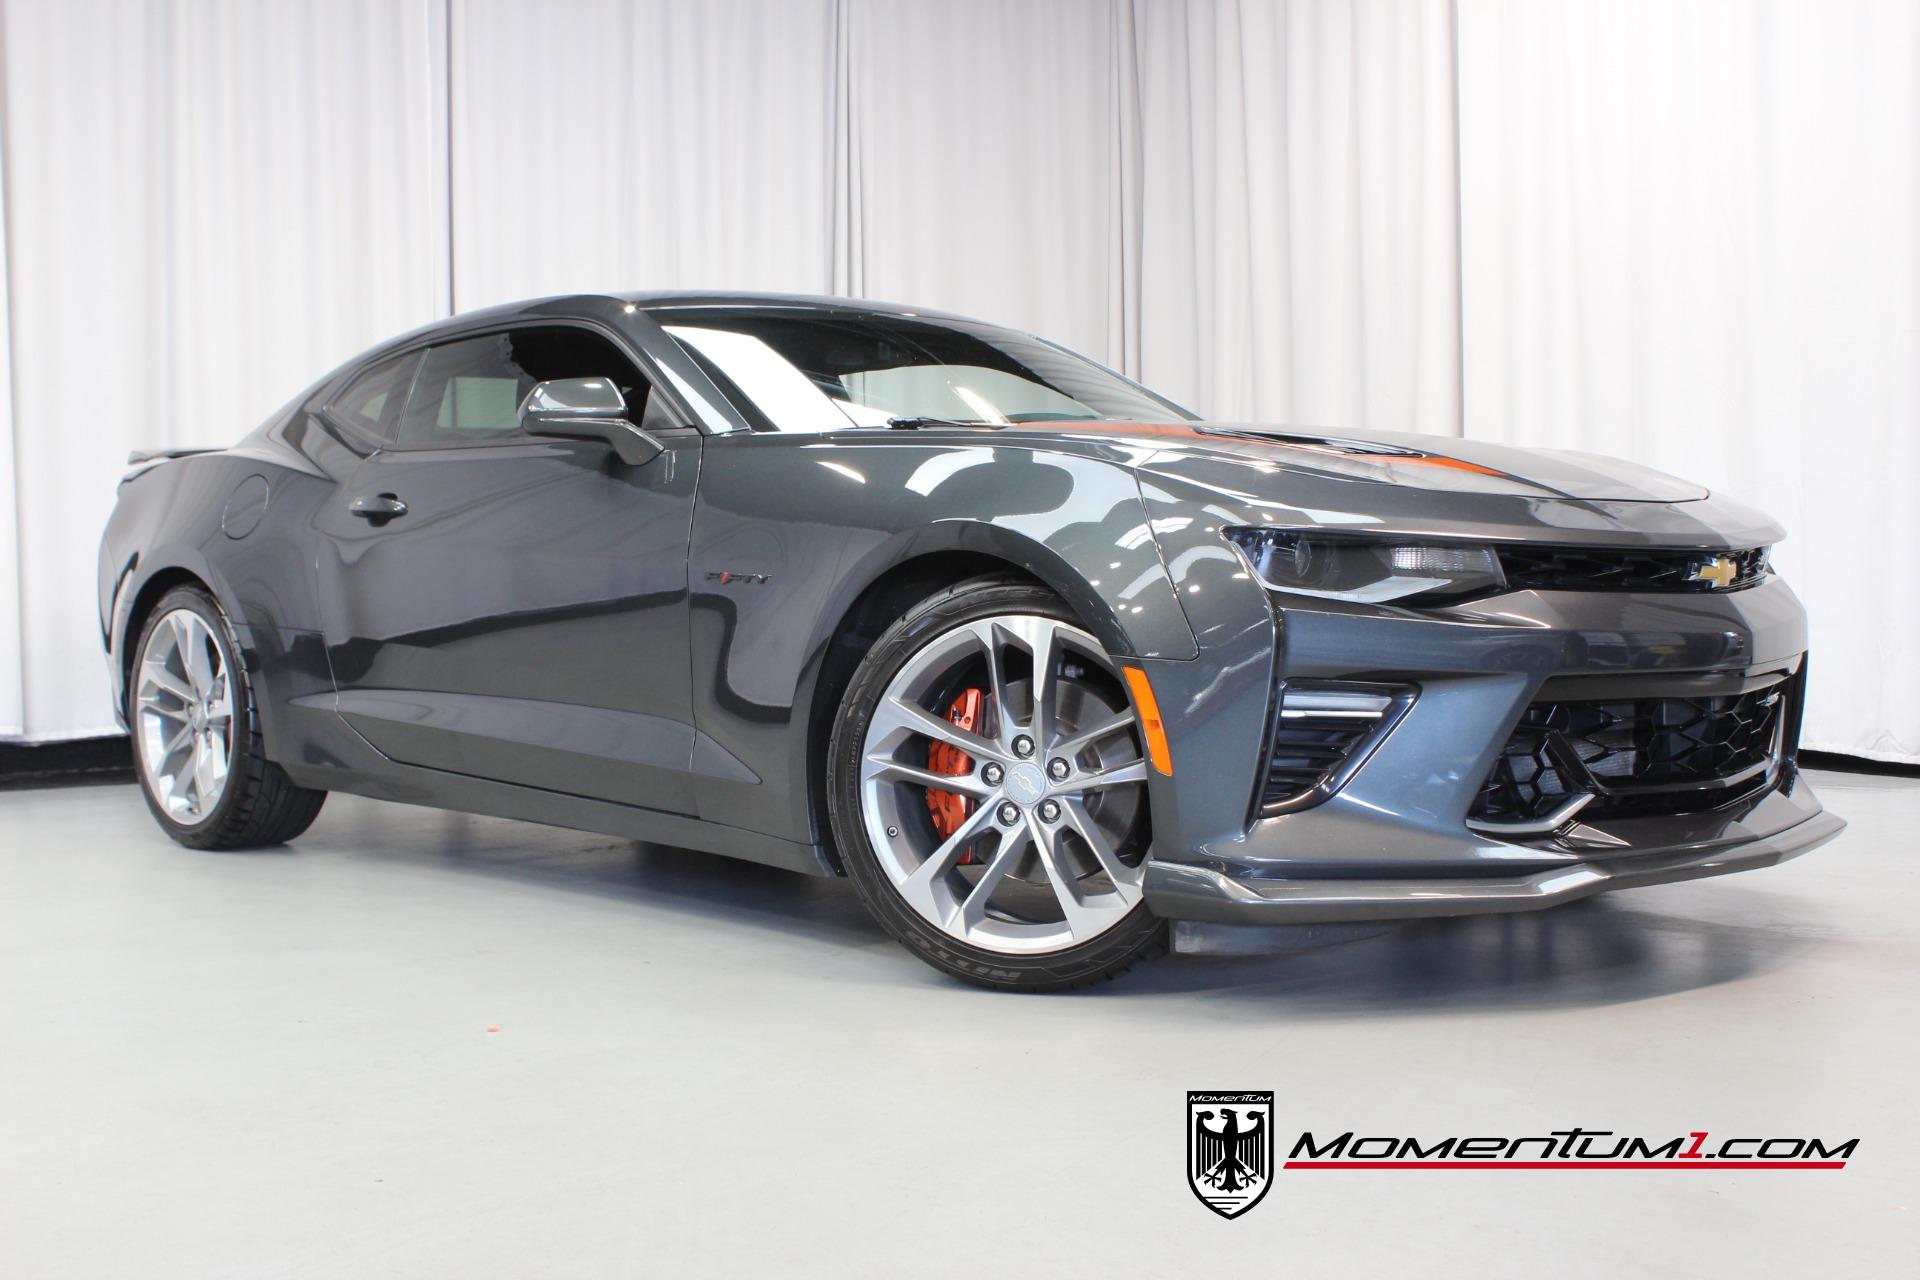 Used 2017 Chevrolet Camaro SS 50 Anniversary Edition For Sale (Sold) |  Momentum Motorcars Inc Stock #182952